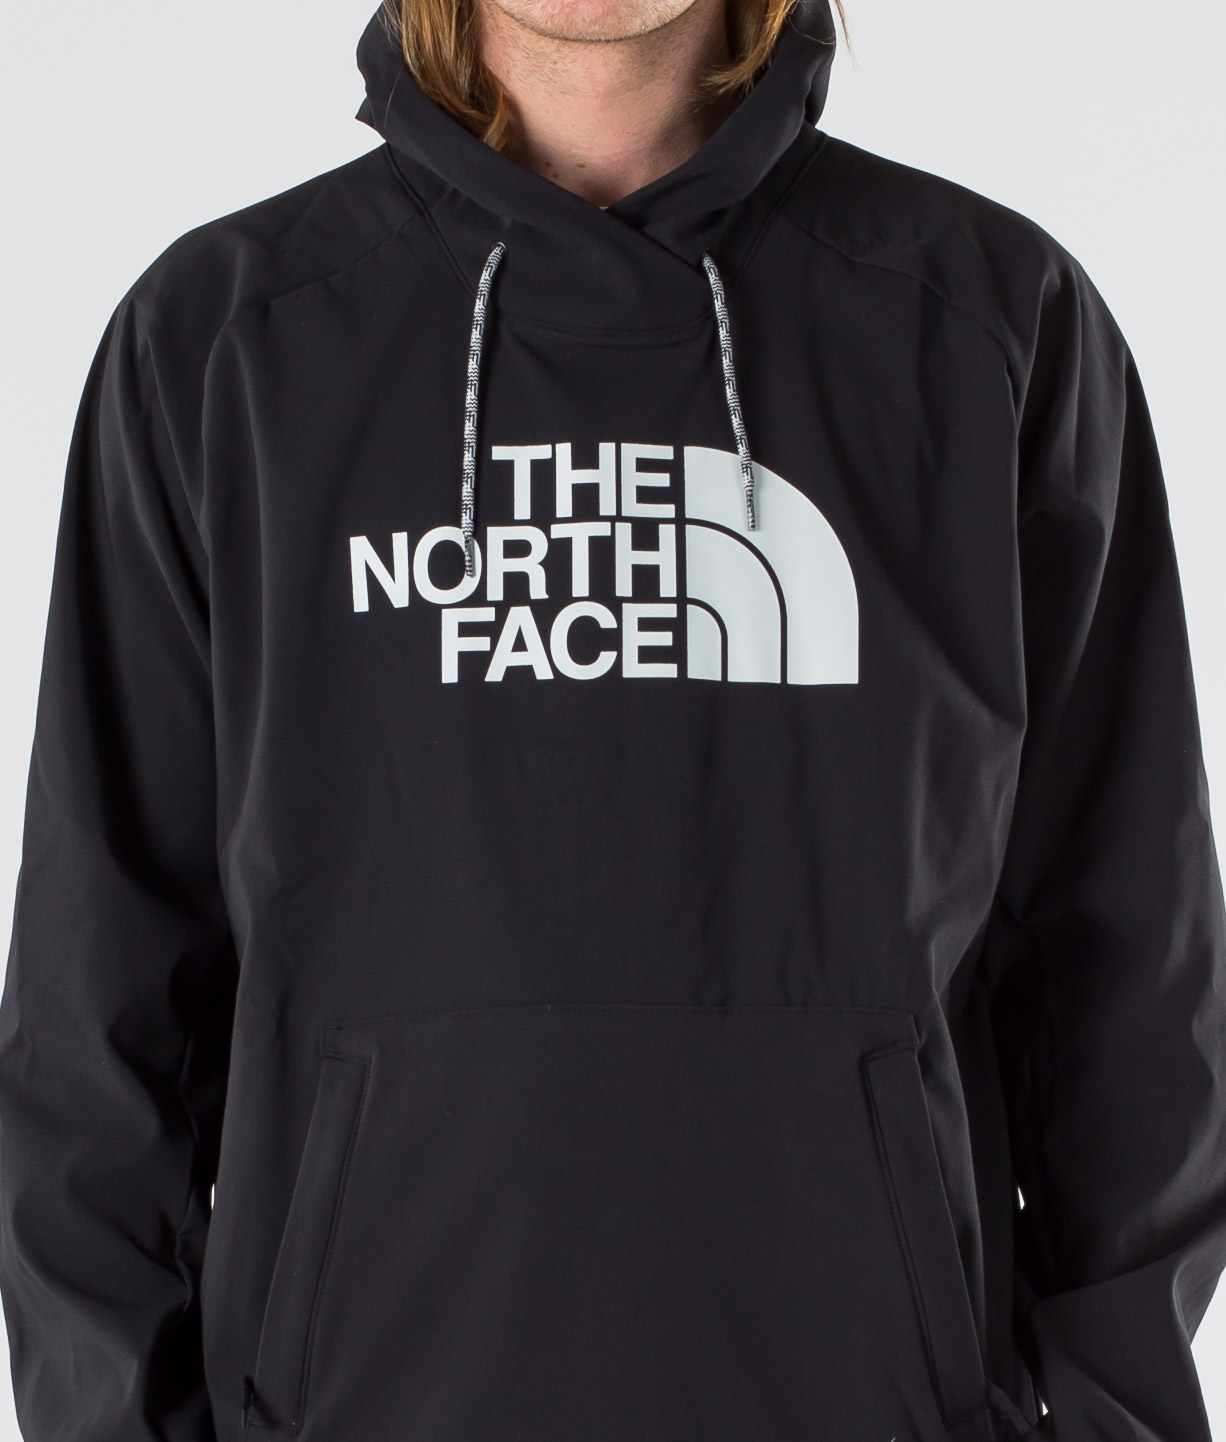 northern face hoodies